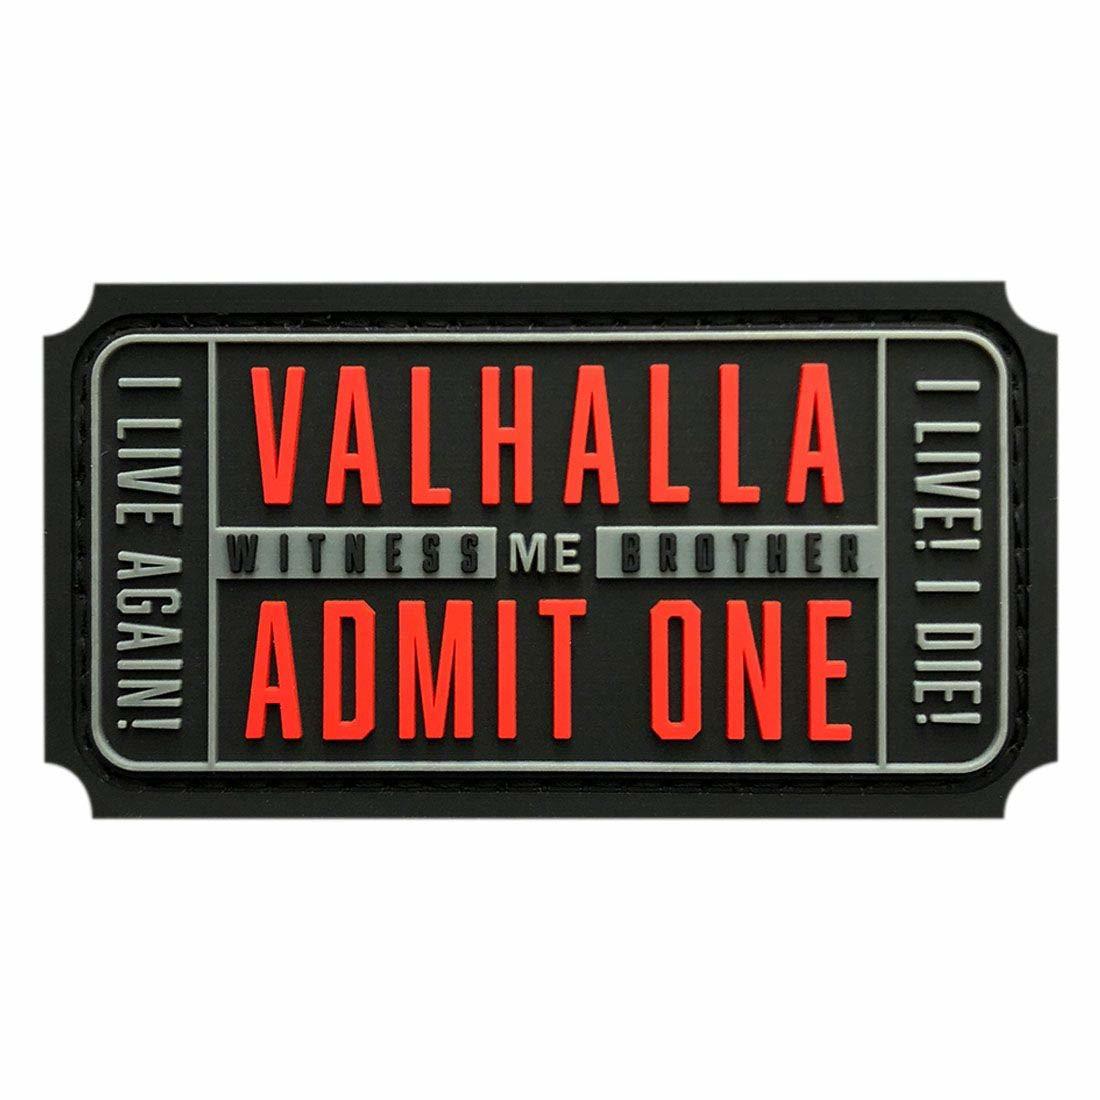 Witness ME Brother Valhalla Admit One Hook Patch [3.0 X 1.5 PVC Rubber VA-6] - $8.99